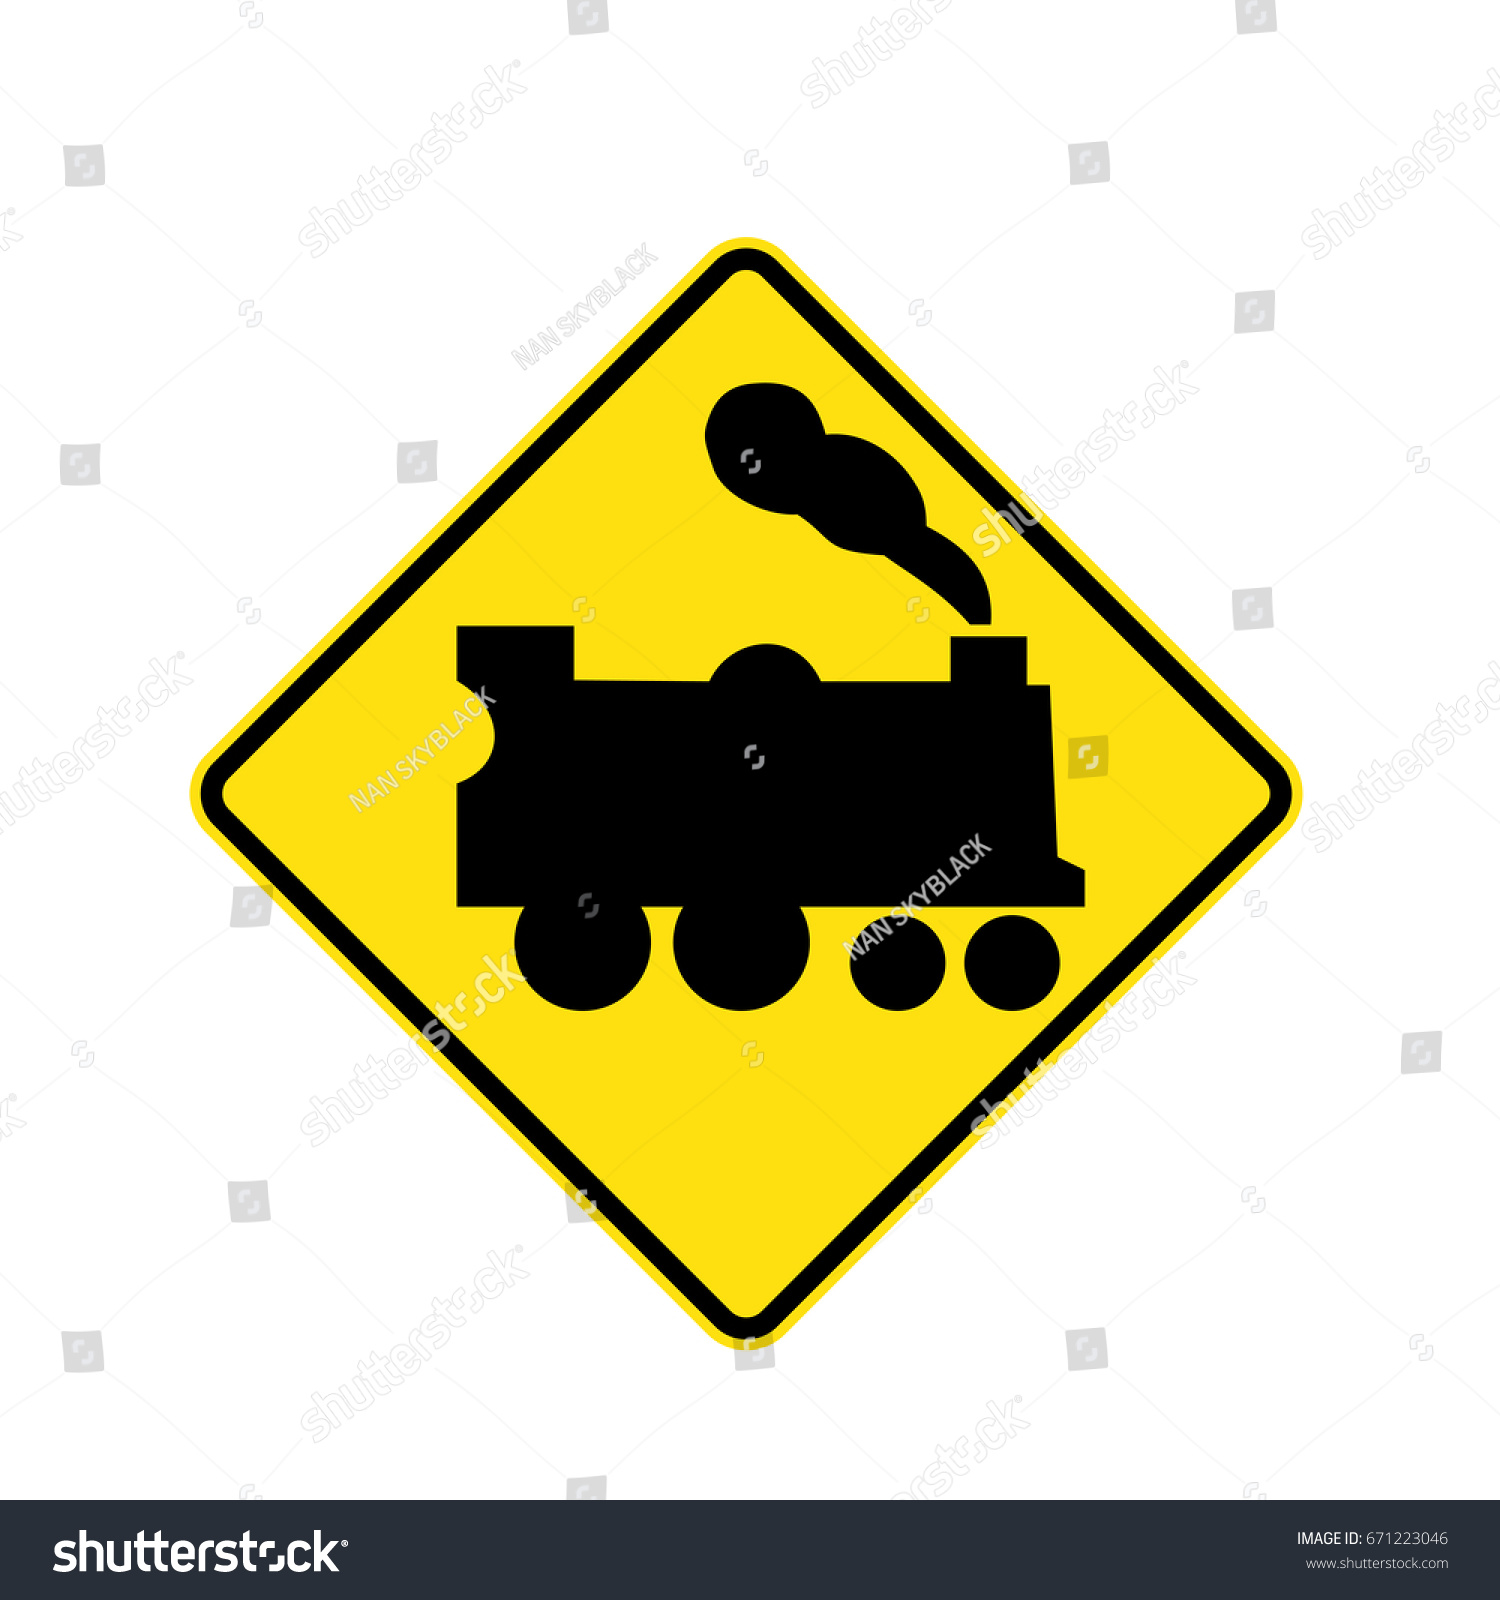 Australia Railway Level Crossing Without Gate Stock Vector Royalty Free